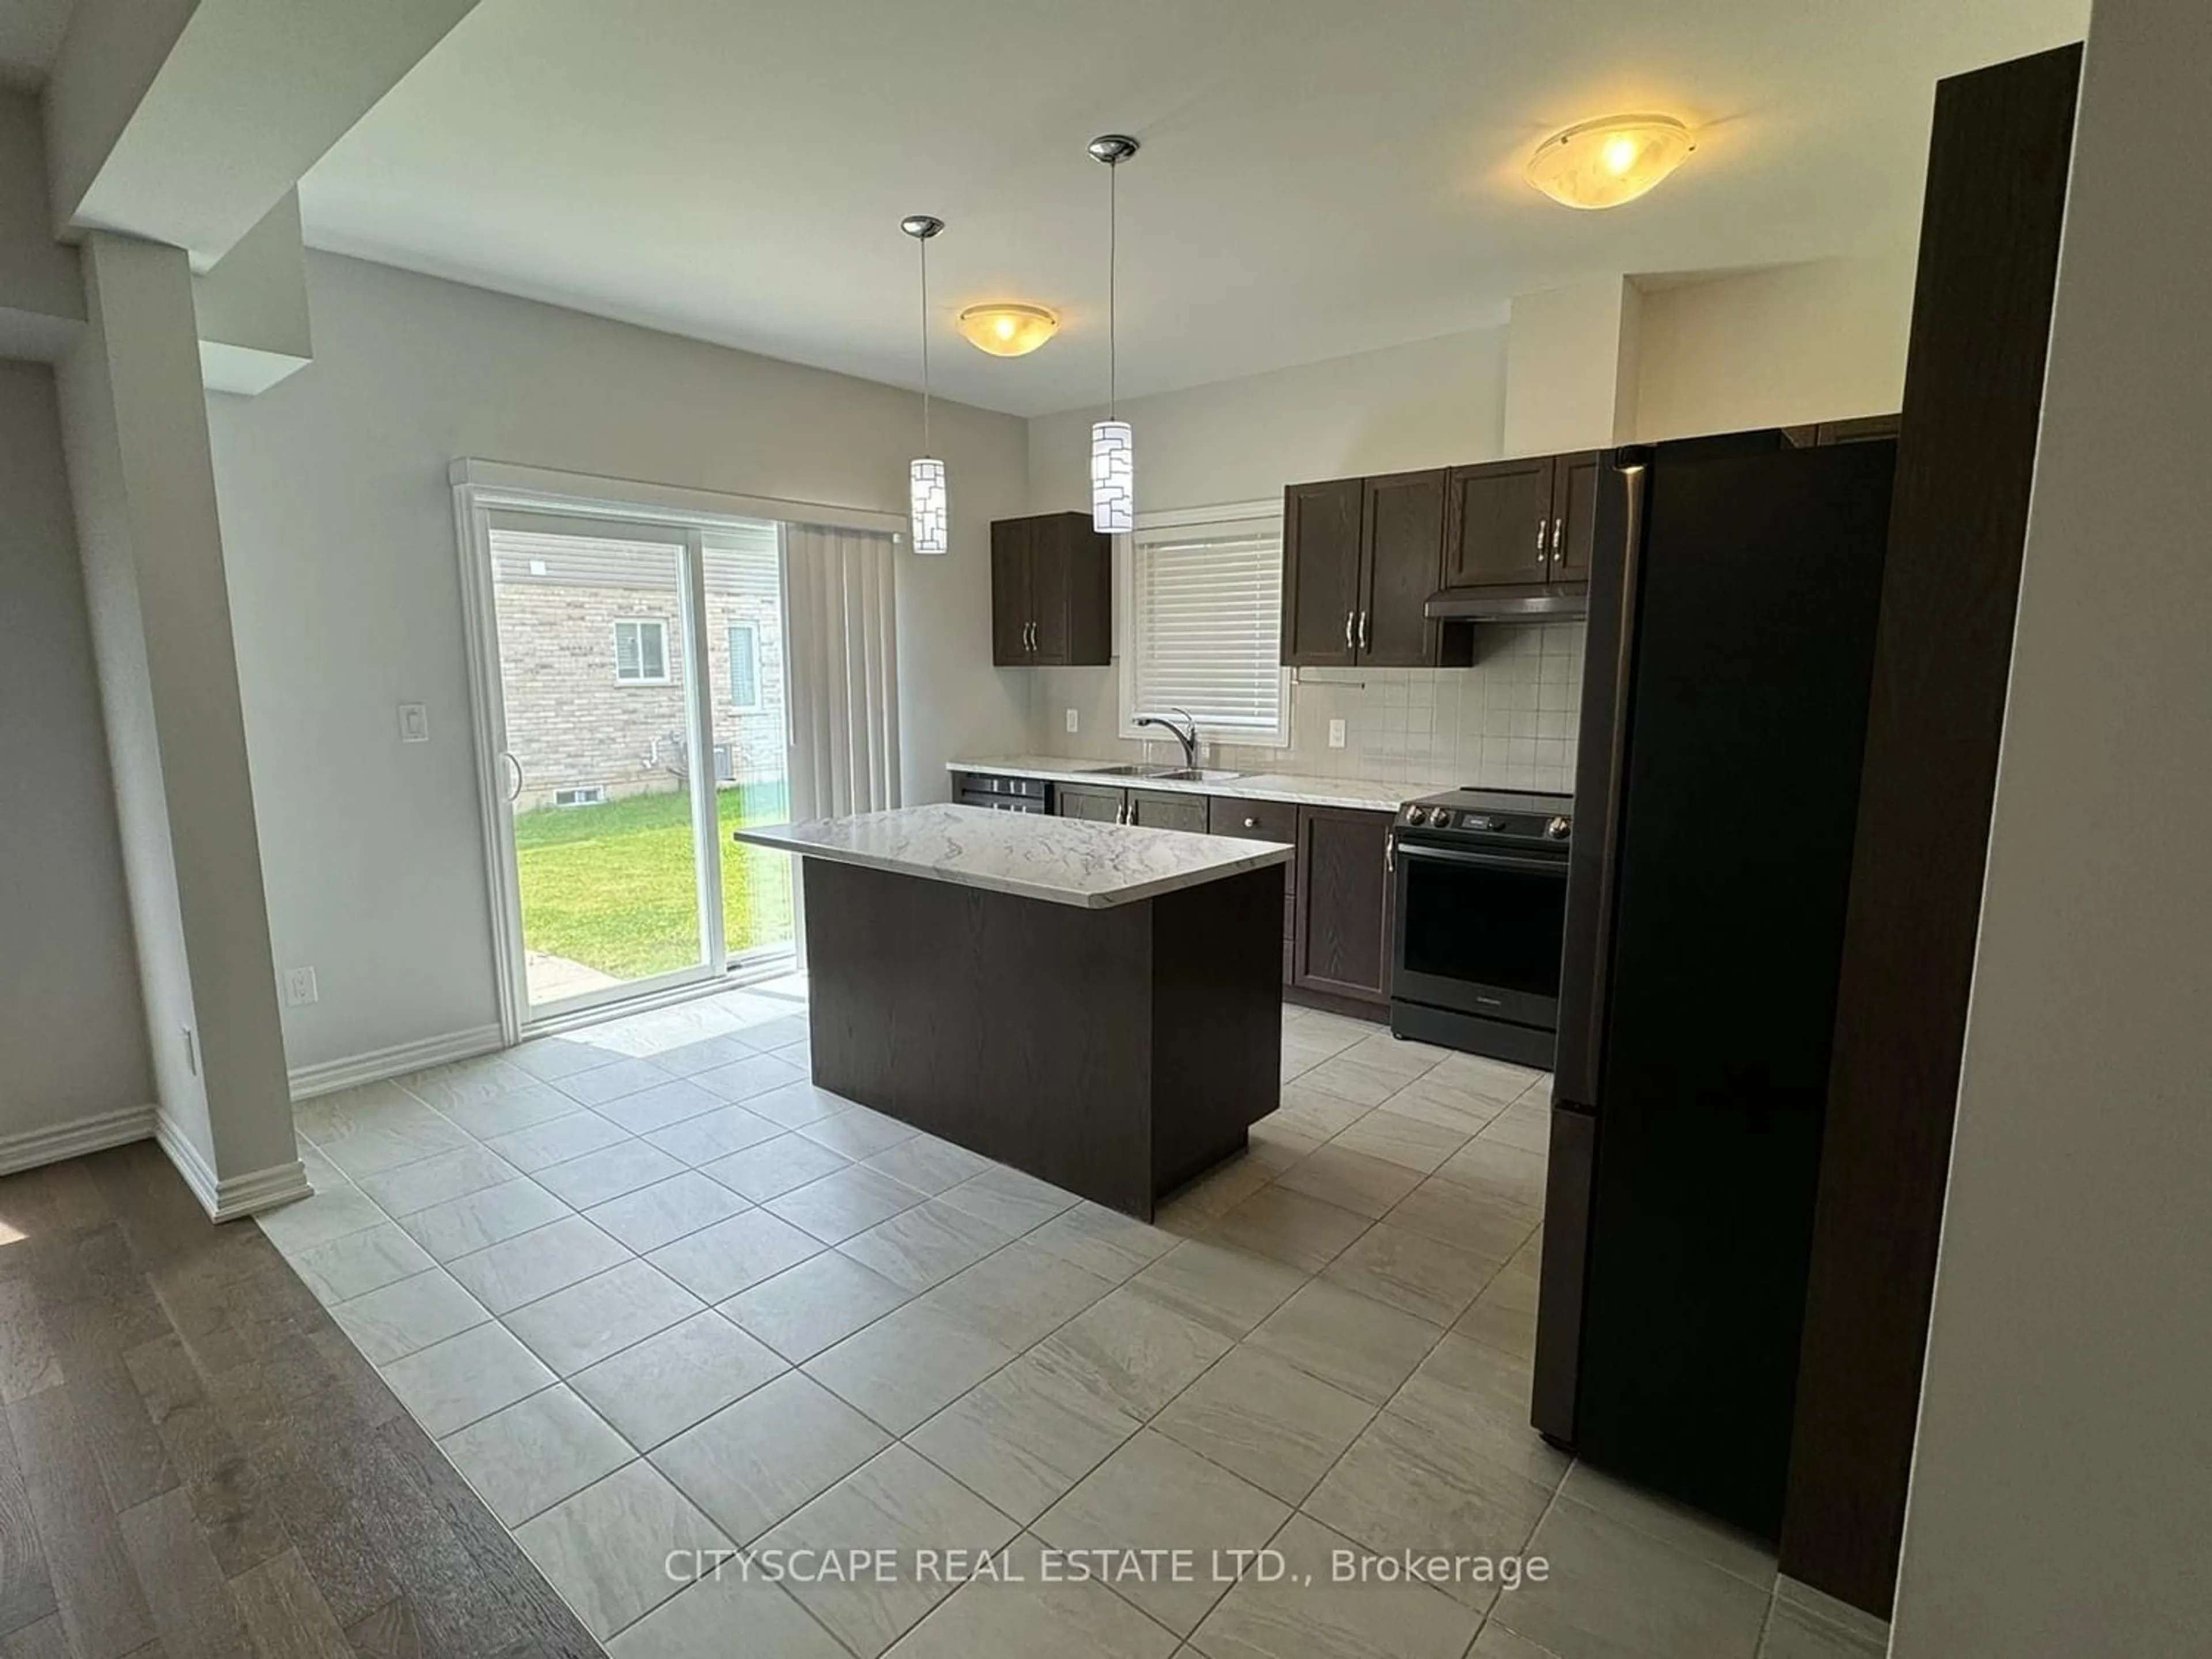 Standard kitchen for 94 Mccabe Ave, Welland Ontario L3B 0H5